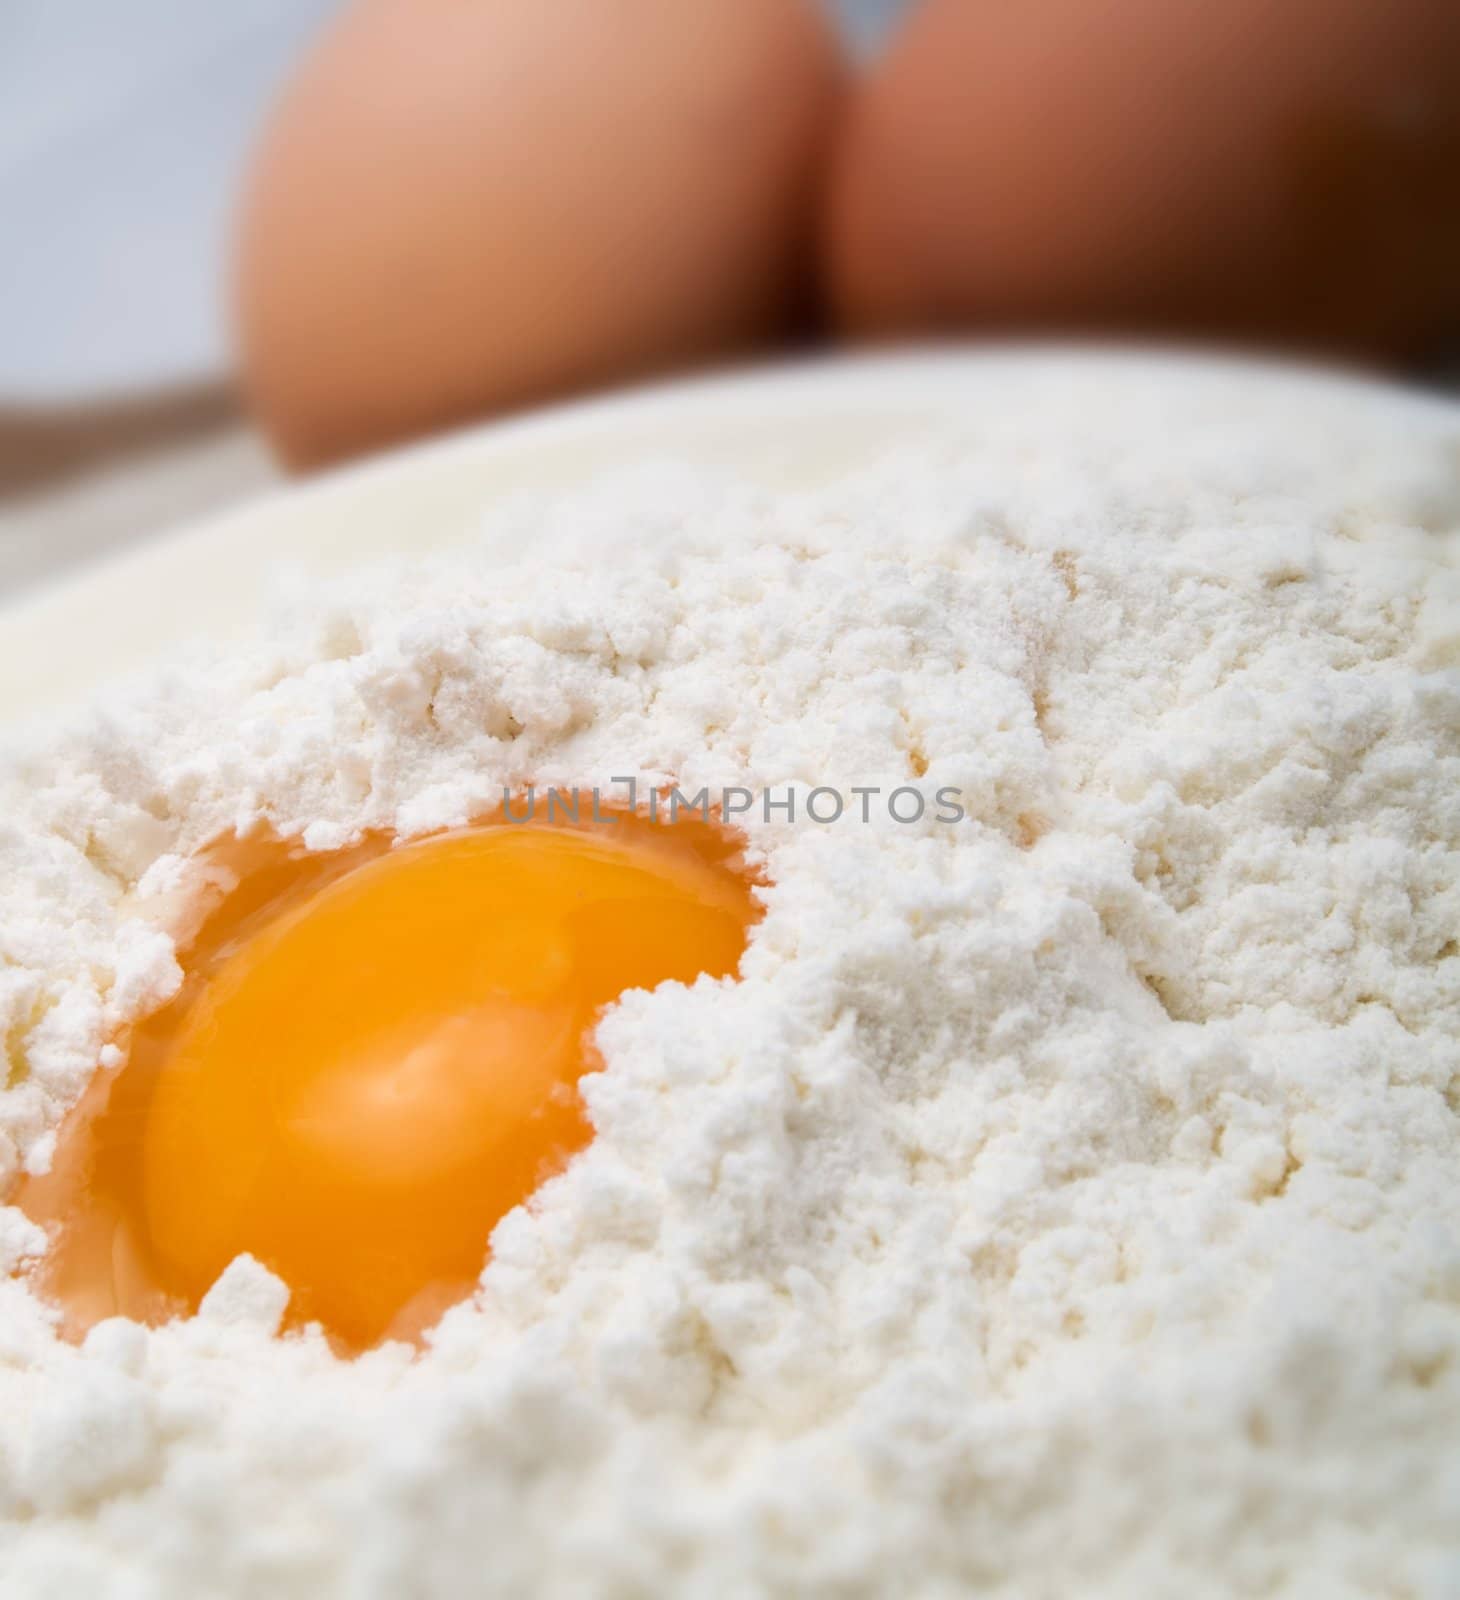 Egg and flour in a white plate